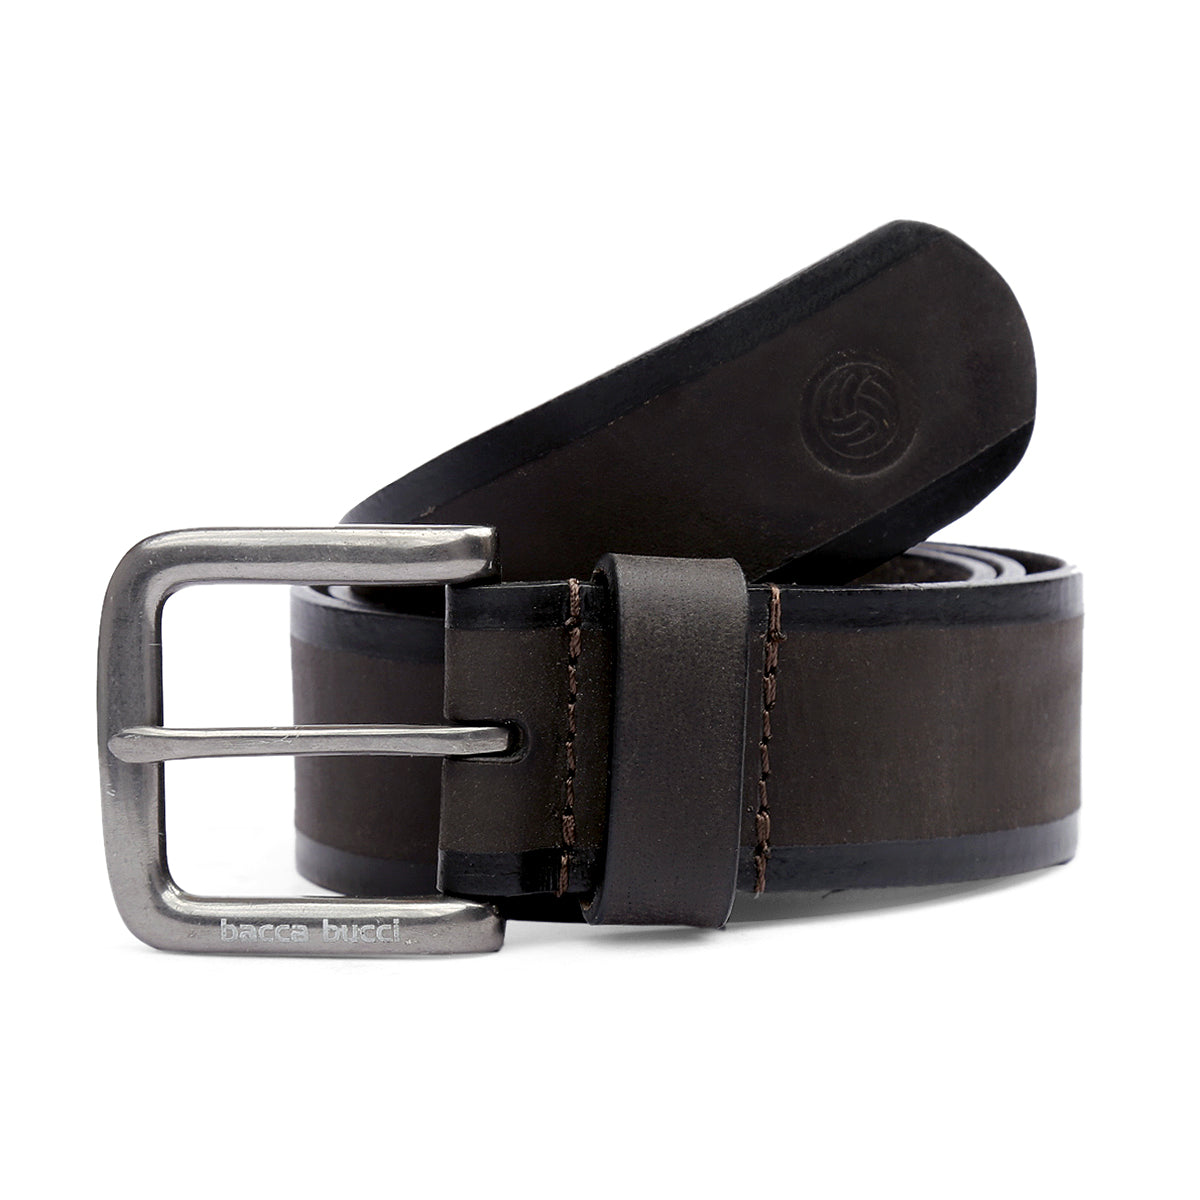 Bacca Bucci Men's Casual Genuine Leather Jeans Belt 40 MM Wide 4 MM Thick Alloy Prong Buckle for Casual wear-Dark Grey